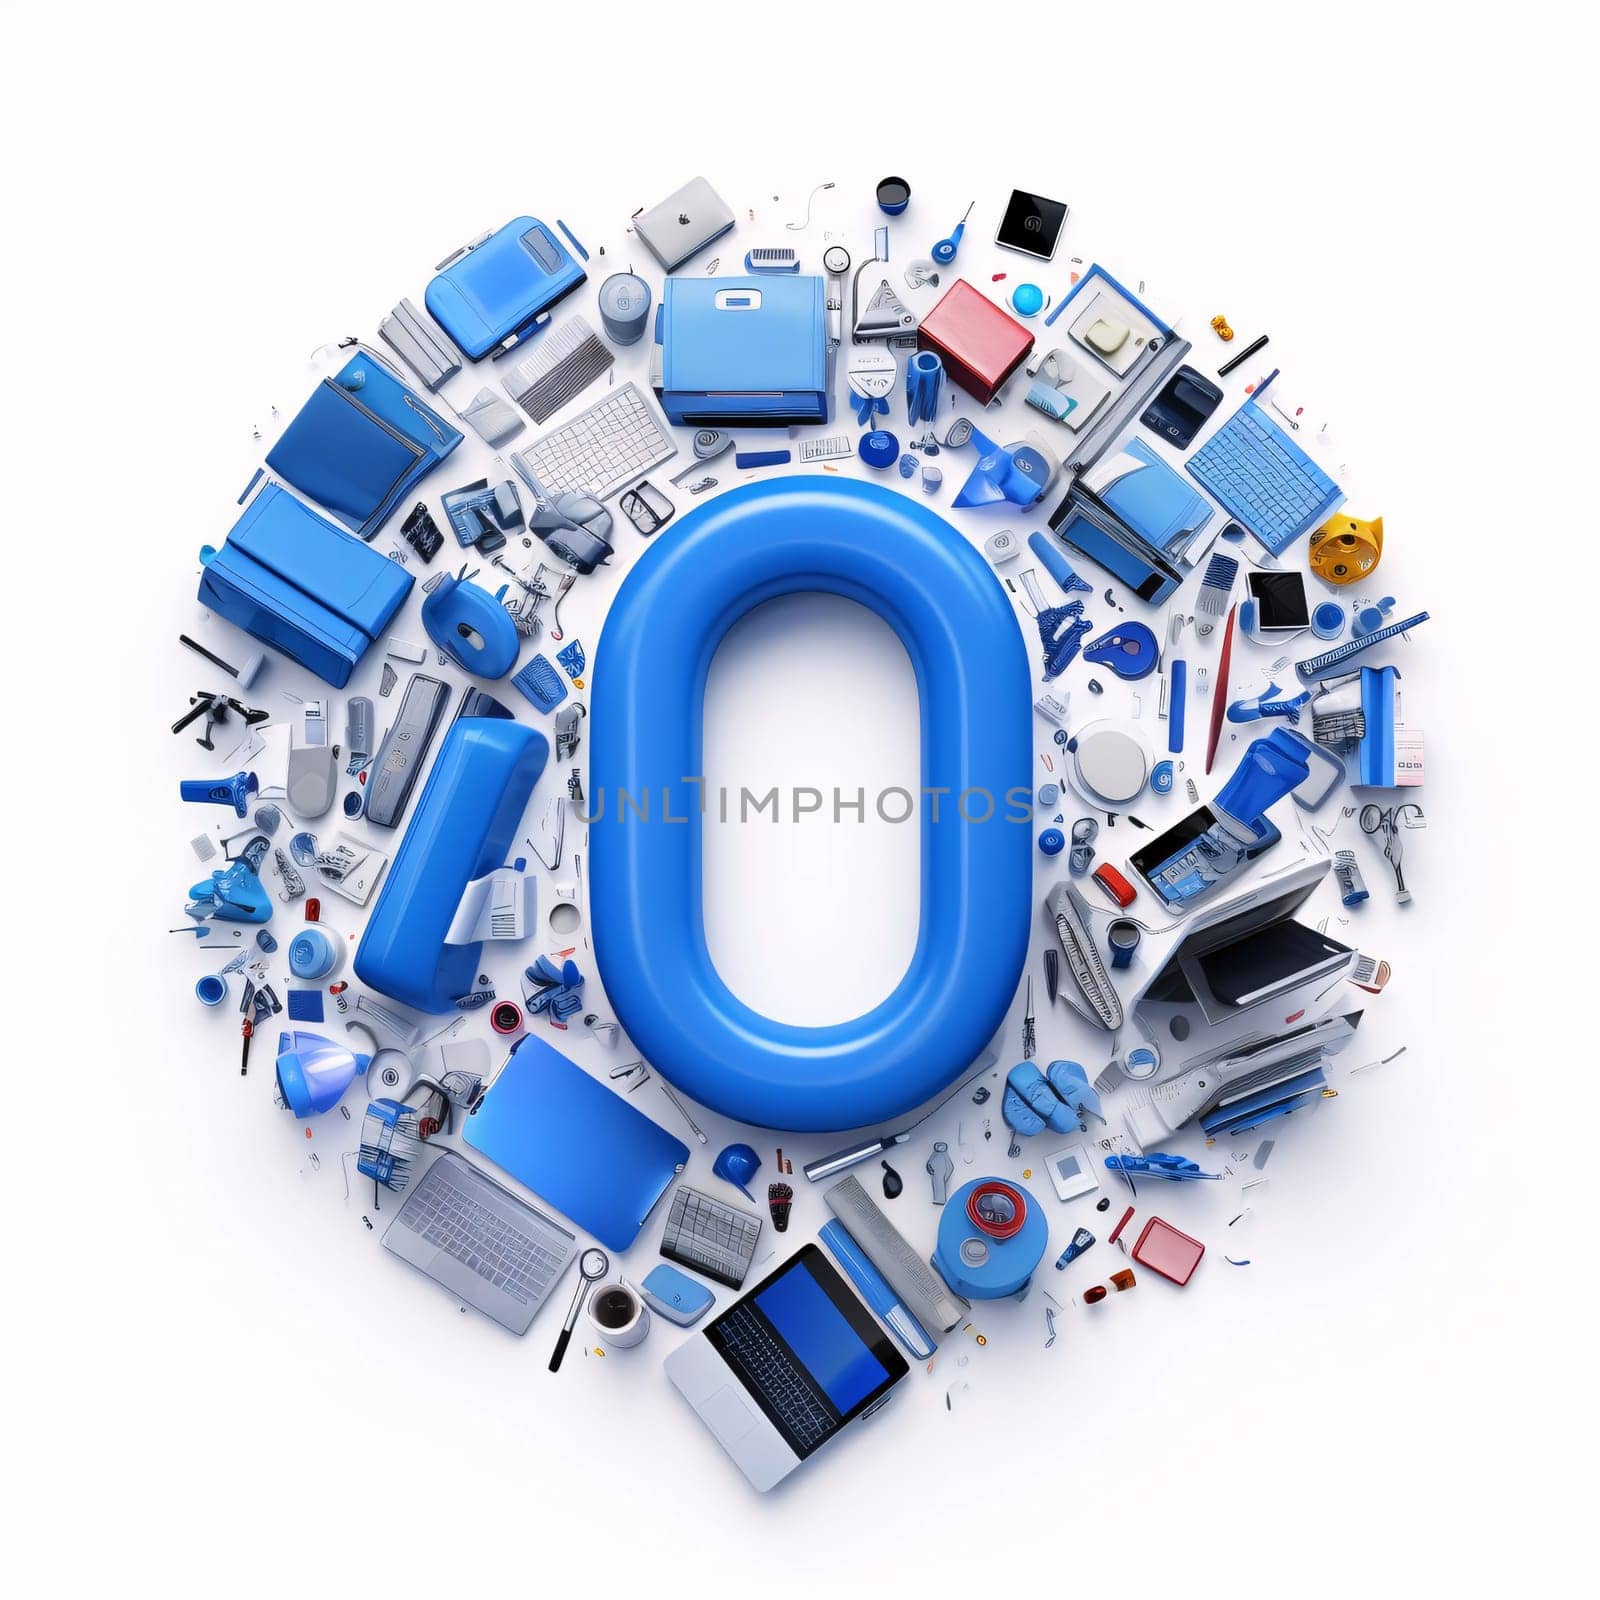 Graphic alphabet letters: letter O in circle made of office objects, 3D rendering isolated on white background